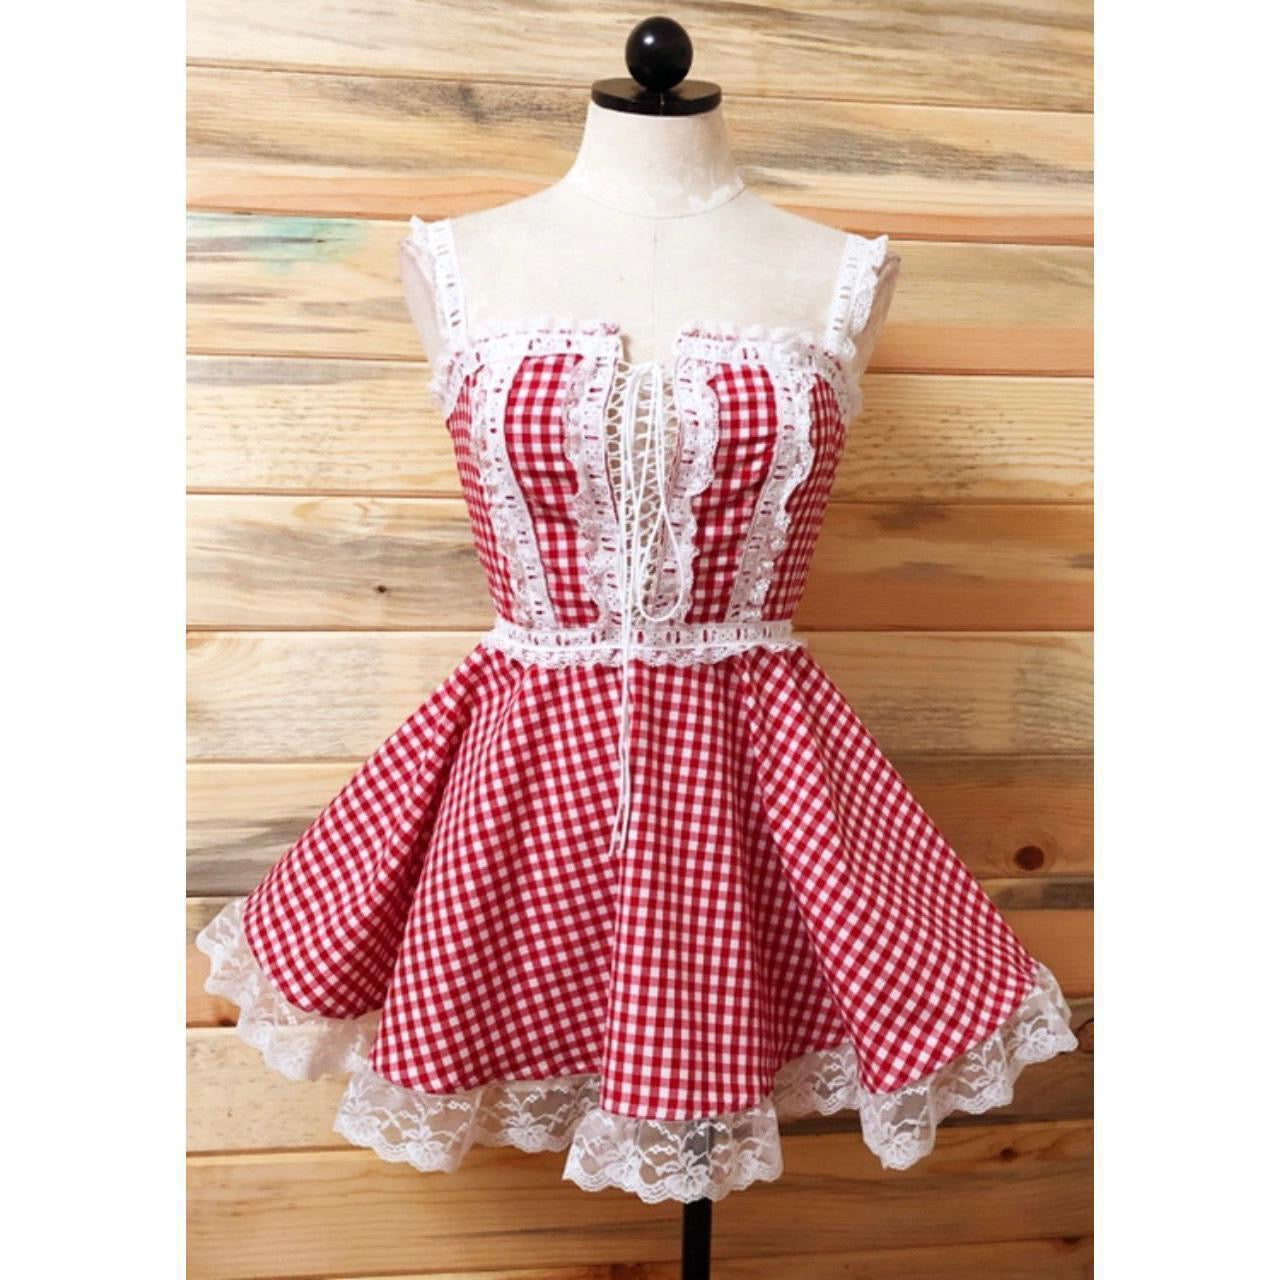 The Danni Dress in Red Gingham